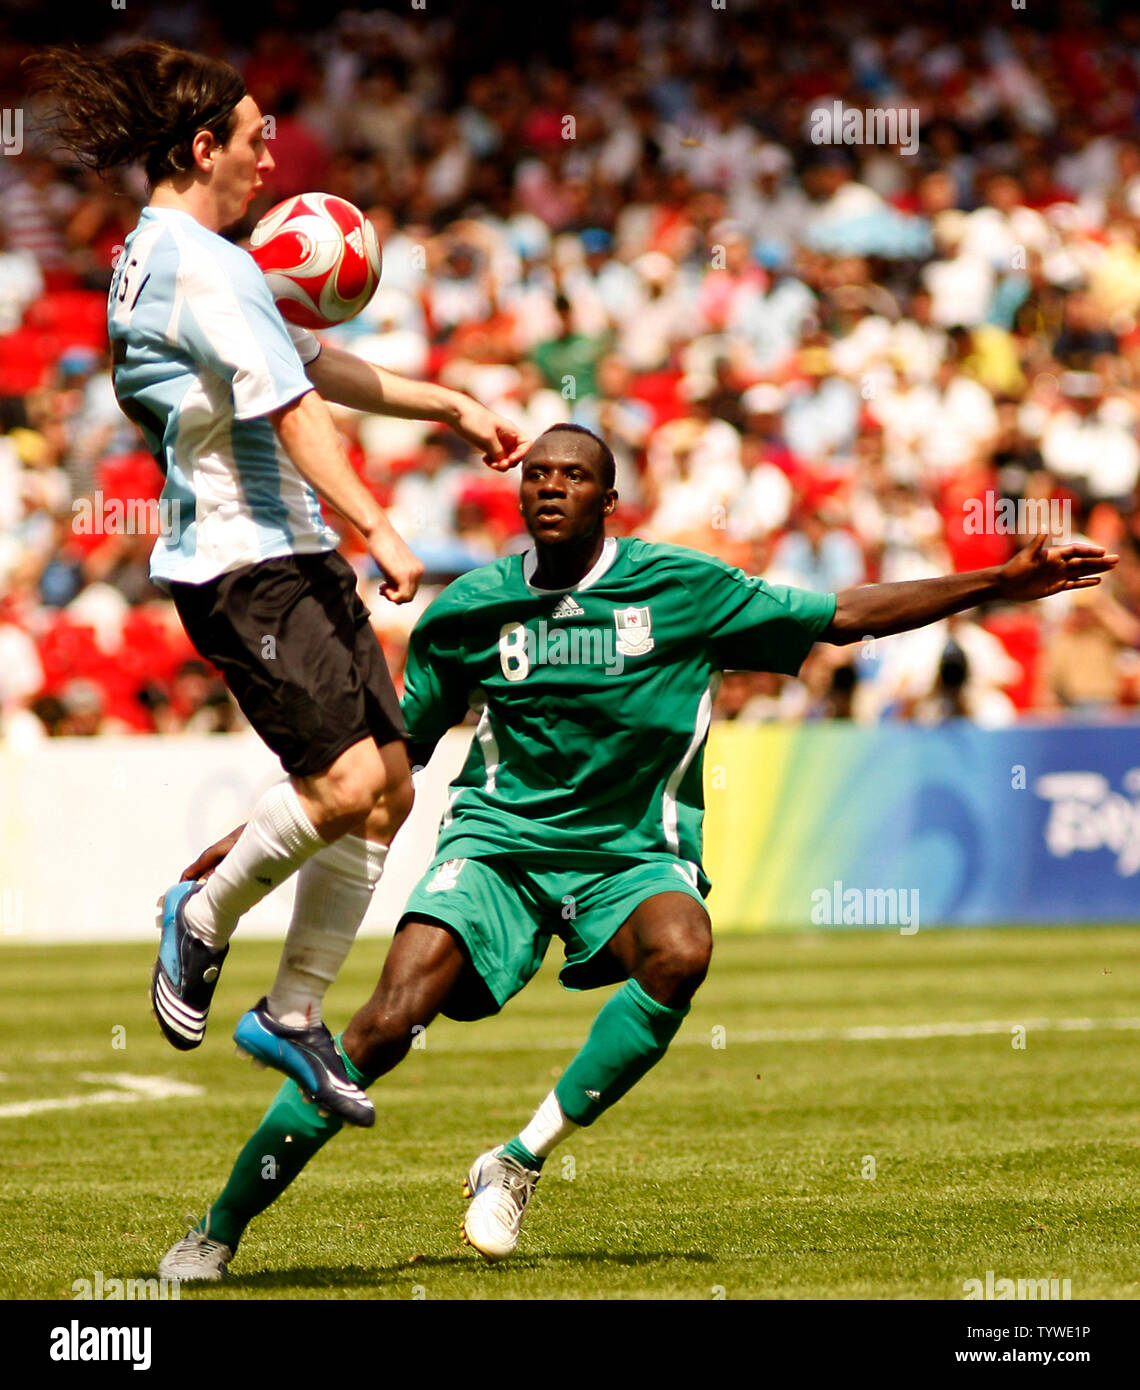 Argentina's Lionel Messi (L) and Nigeria's Sani Kaita fight for the ball during the men's football final in the Beijing 2008 Olympic Games August 23, 2008.  Argentina won 1-0 for the gold, while Nigeria settled for the silver and Brazil the bronze.  (UPI Photo/Stephen Shaver) Stock Photo